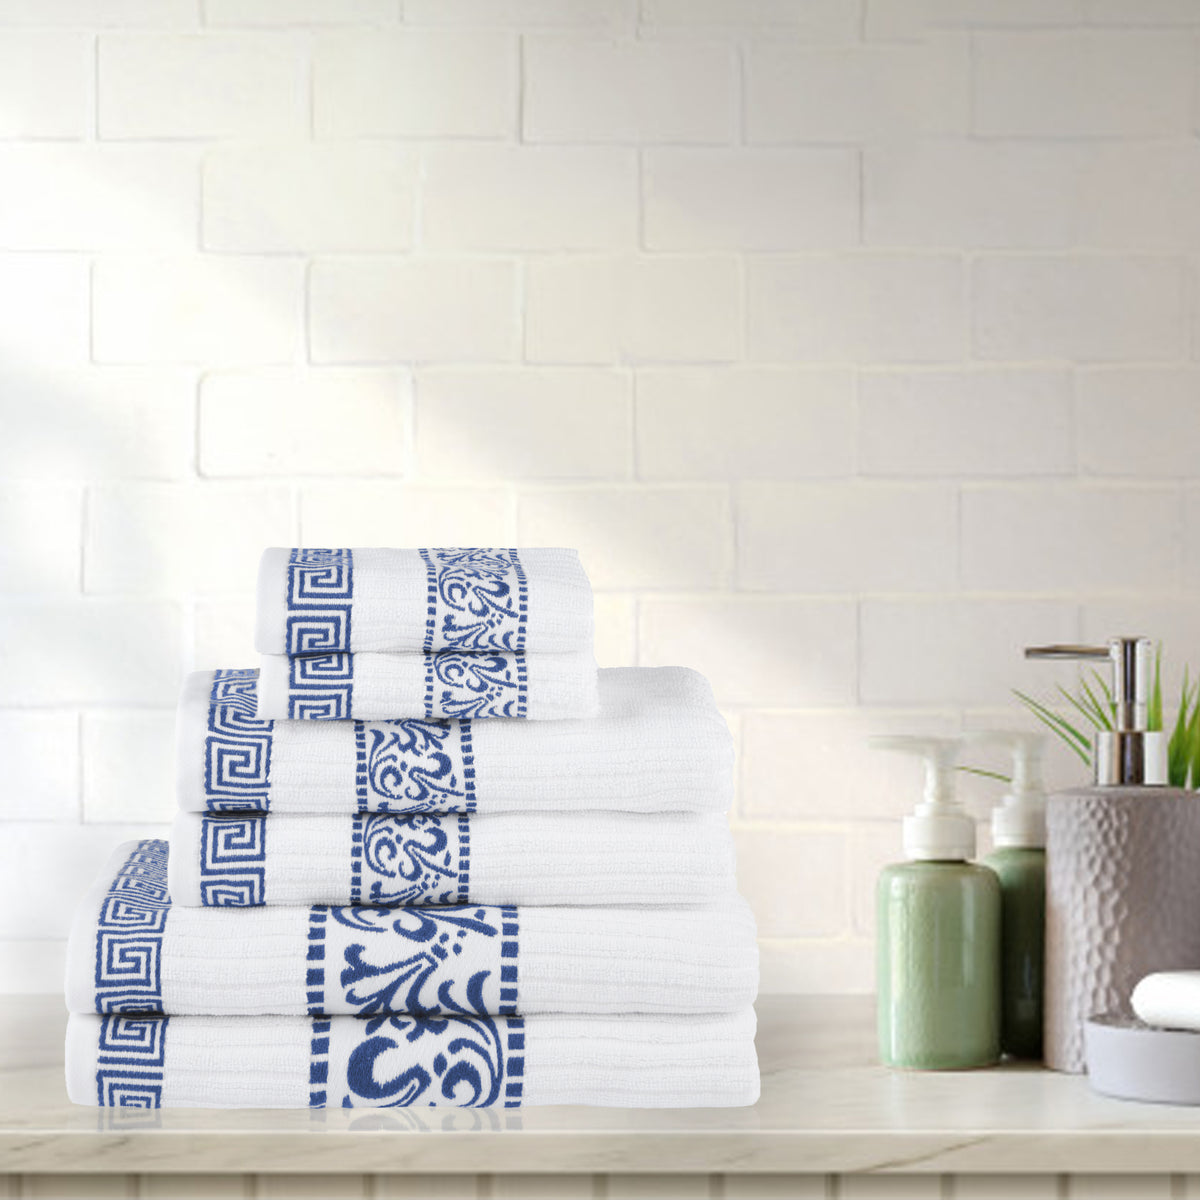 Superior Athens Cotton 6-Piece Assorted Towel Set with Greek Scroll and Floral Pattern - Navy BlueSuperior Athens Cotton 6-Piece Assorted Towel Set with Greek Scroll and Floral Pattern - Navy Blue